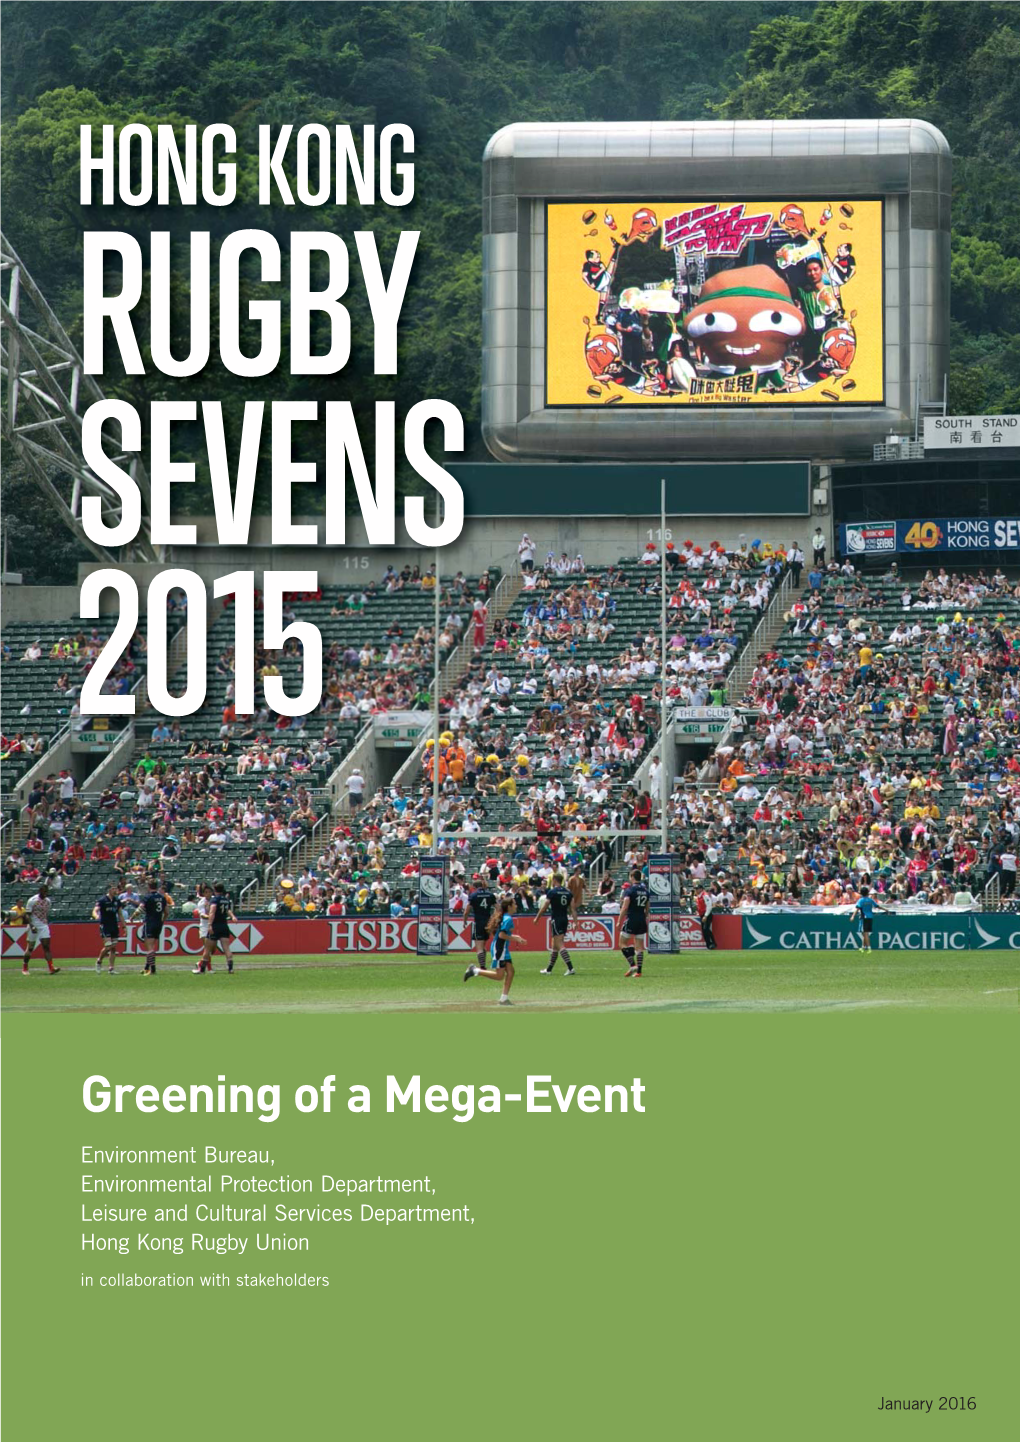 Hong Kong Rugby Sevens 2015, from 27 to 29 March, the Followings Were Recovered and Recycled